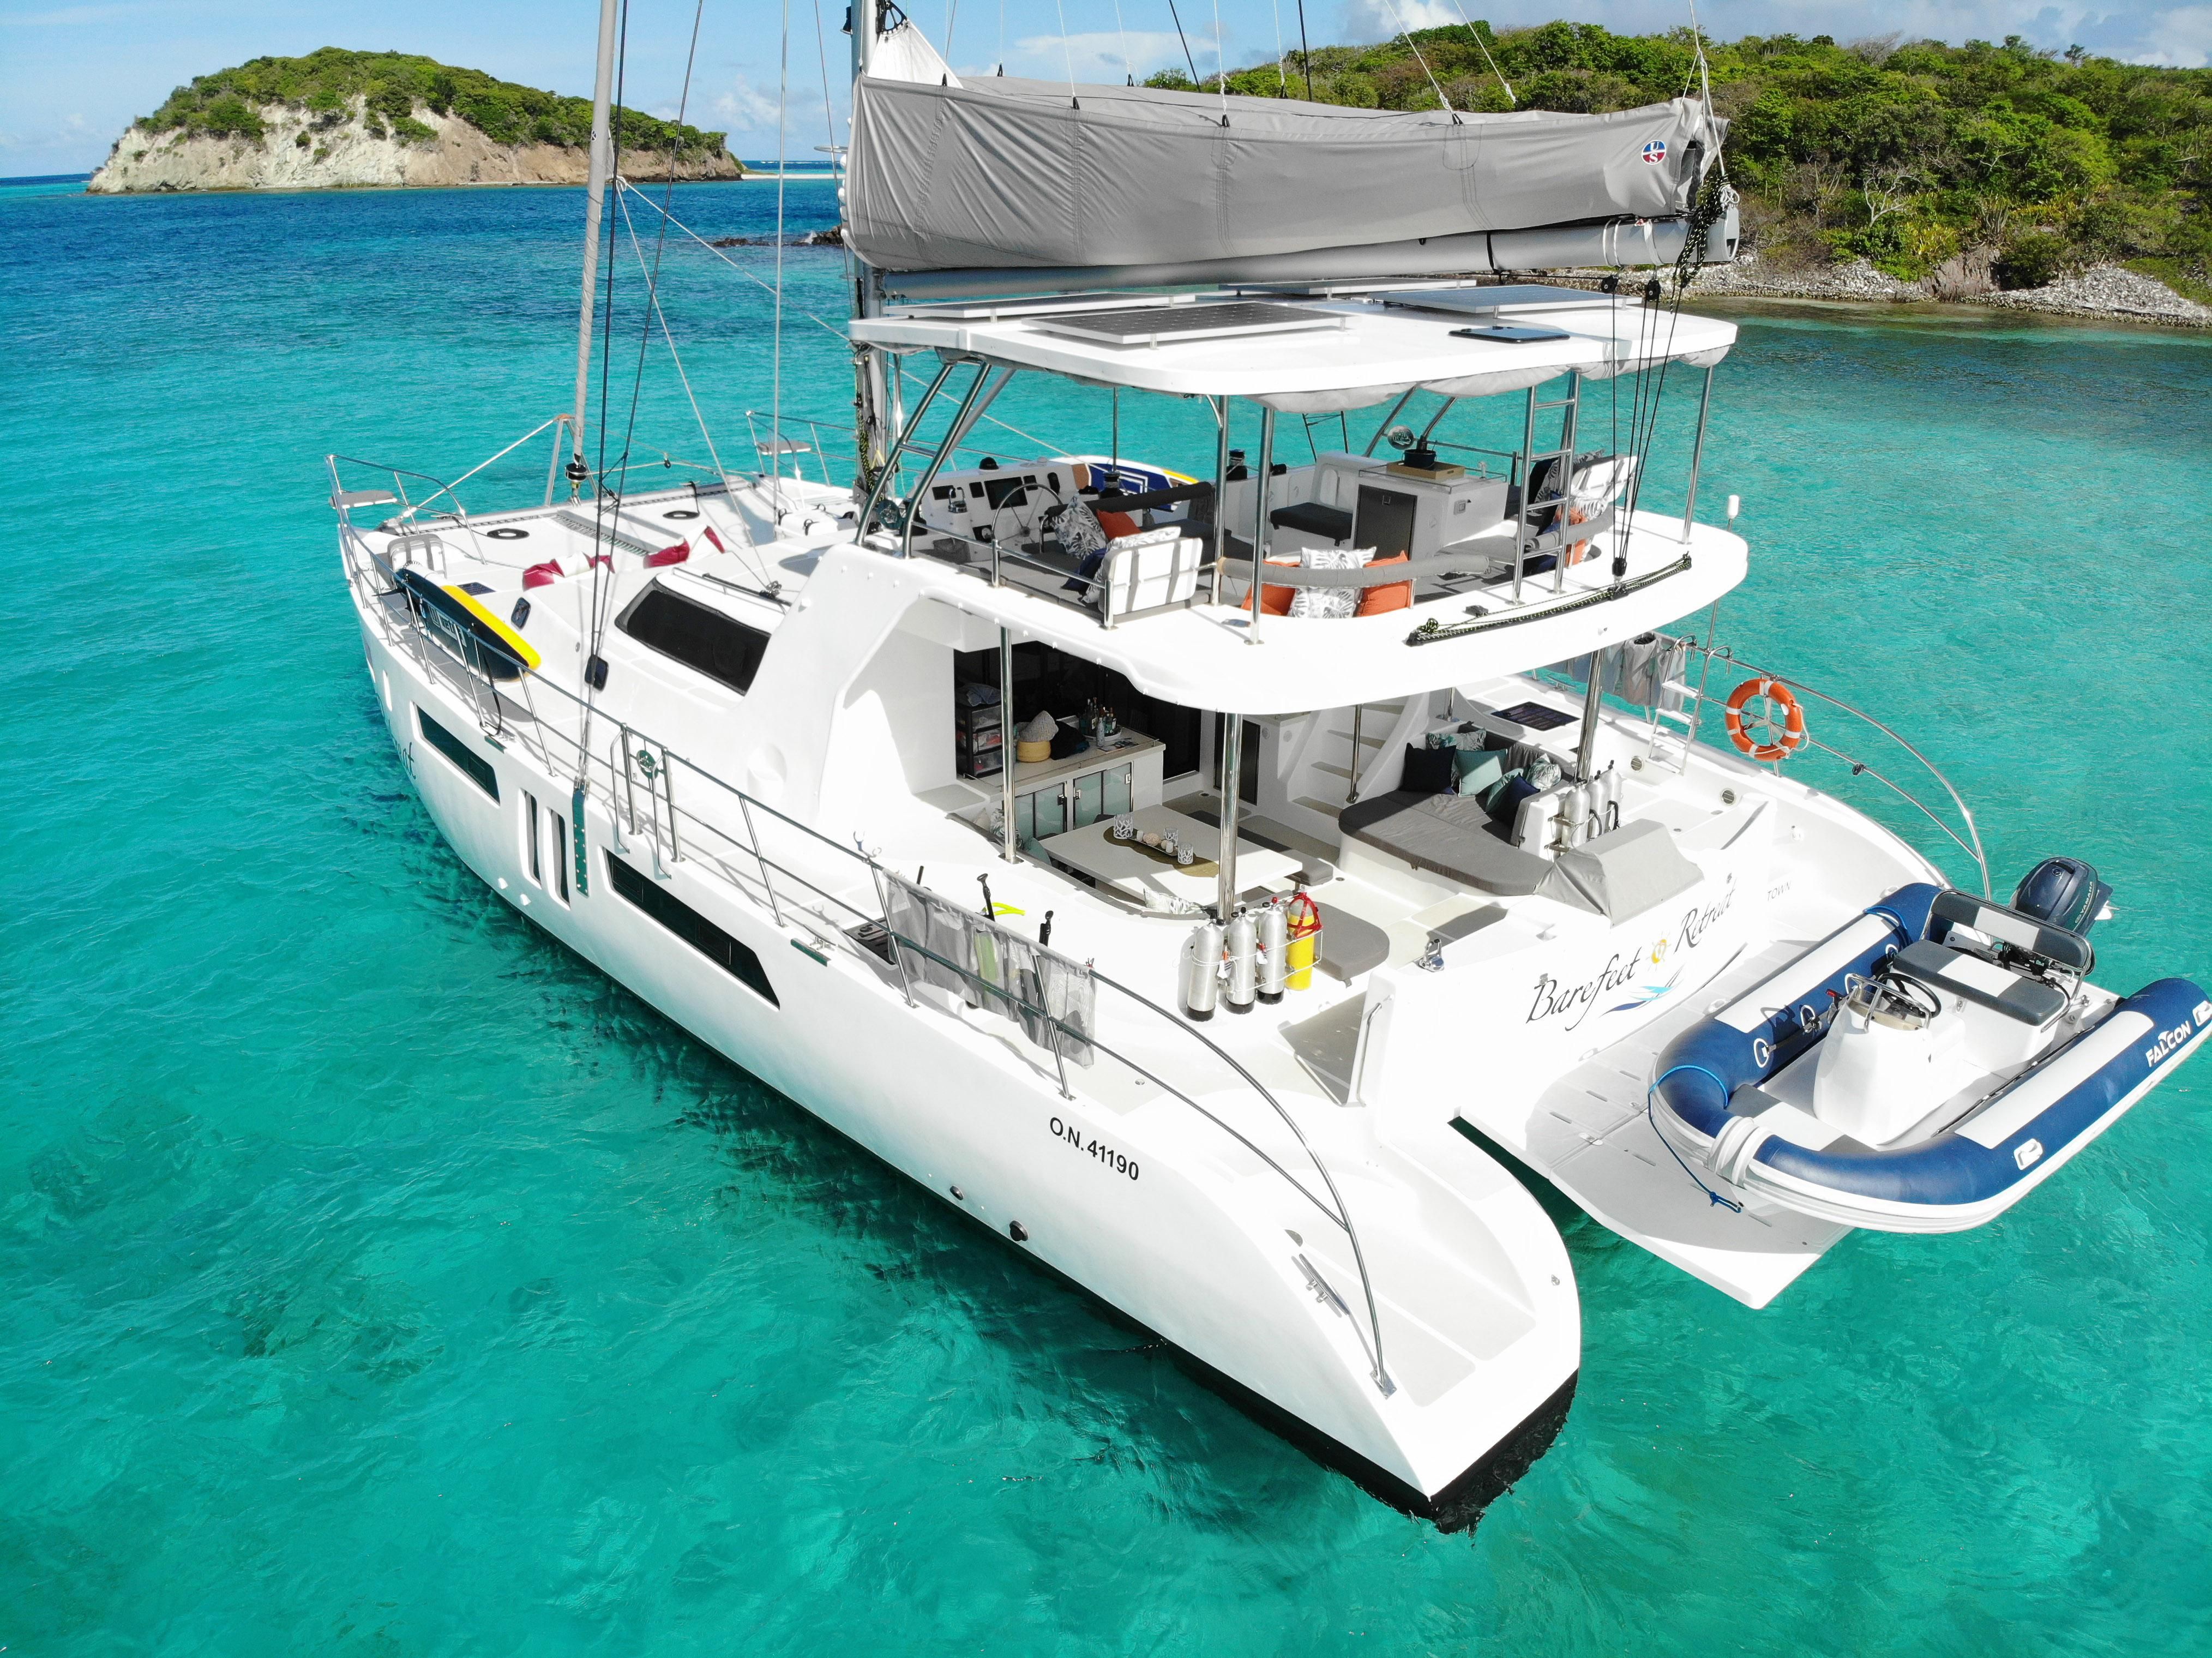 repossessed catamarans for sale near new south wales